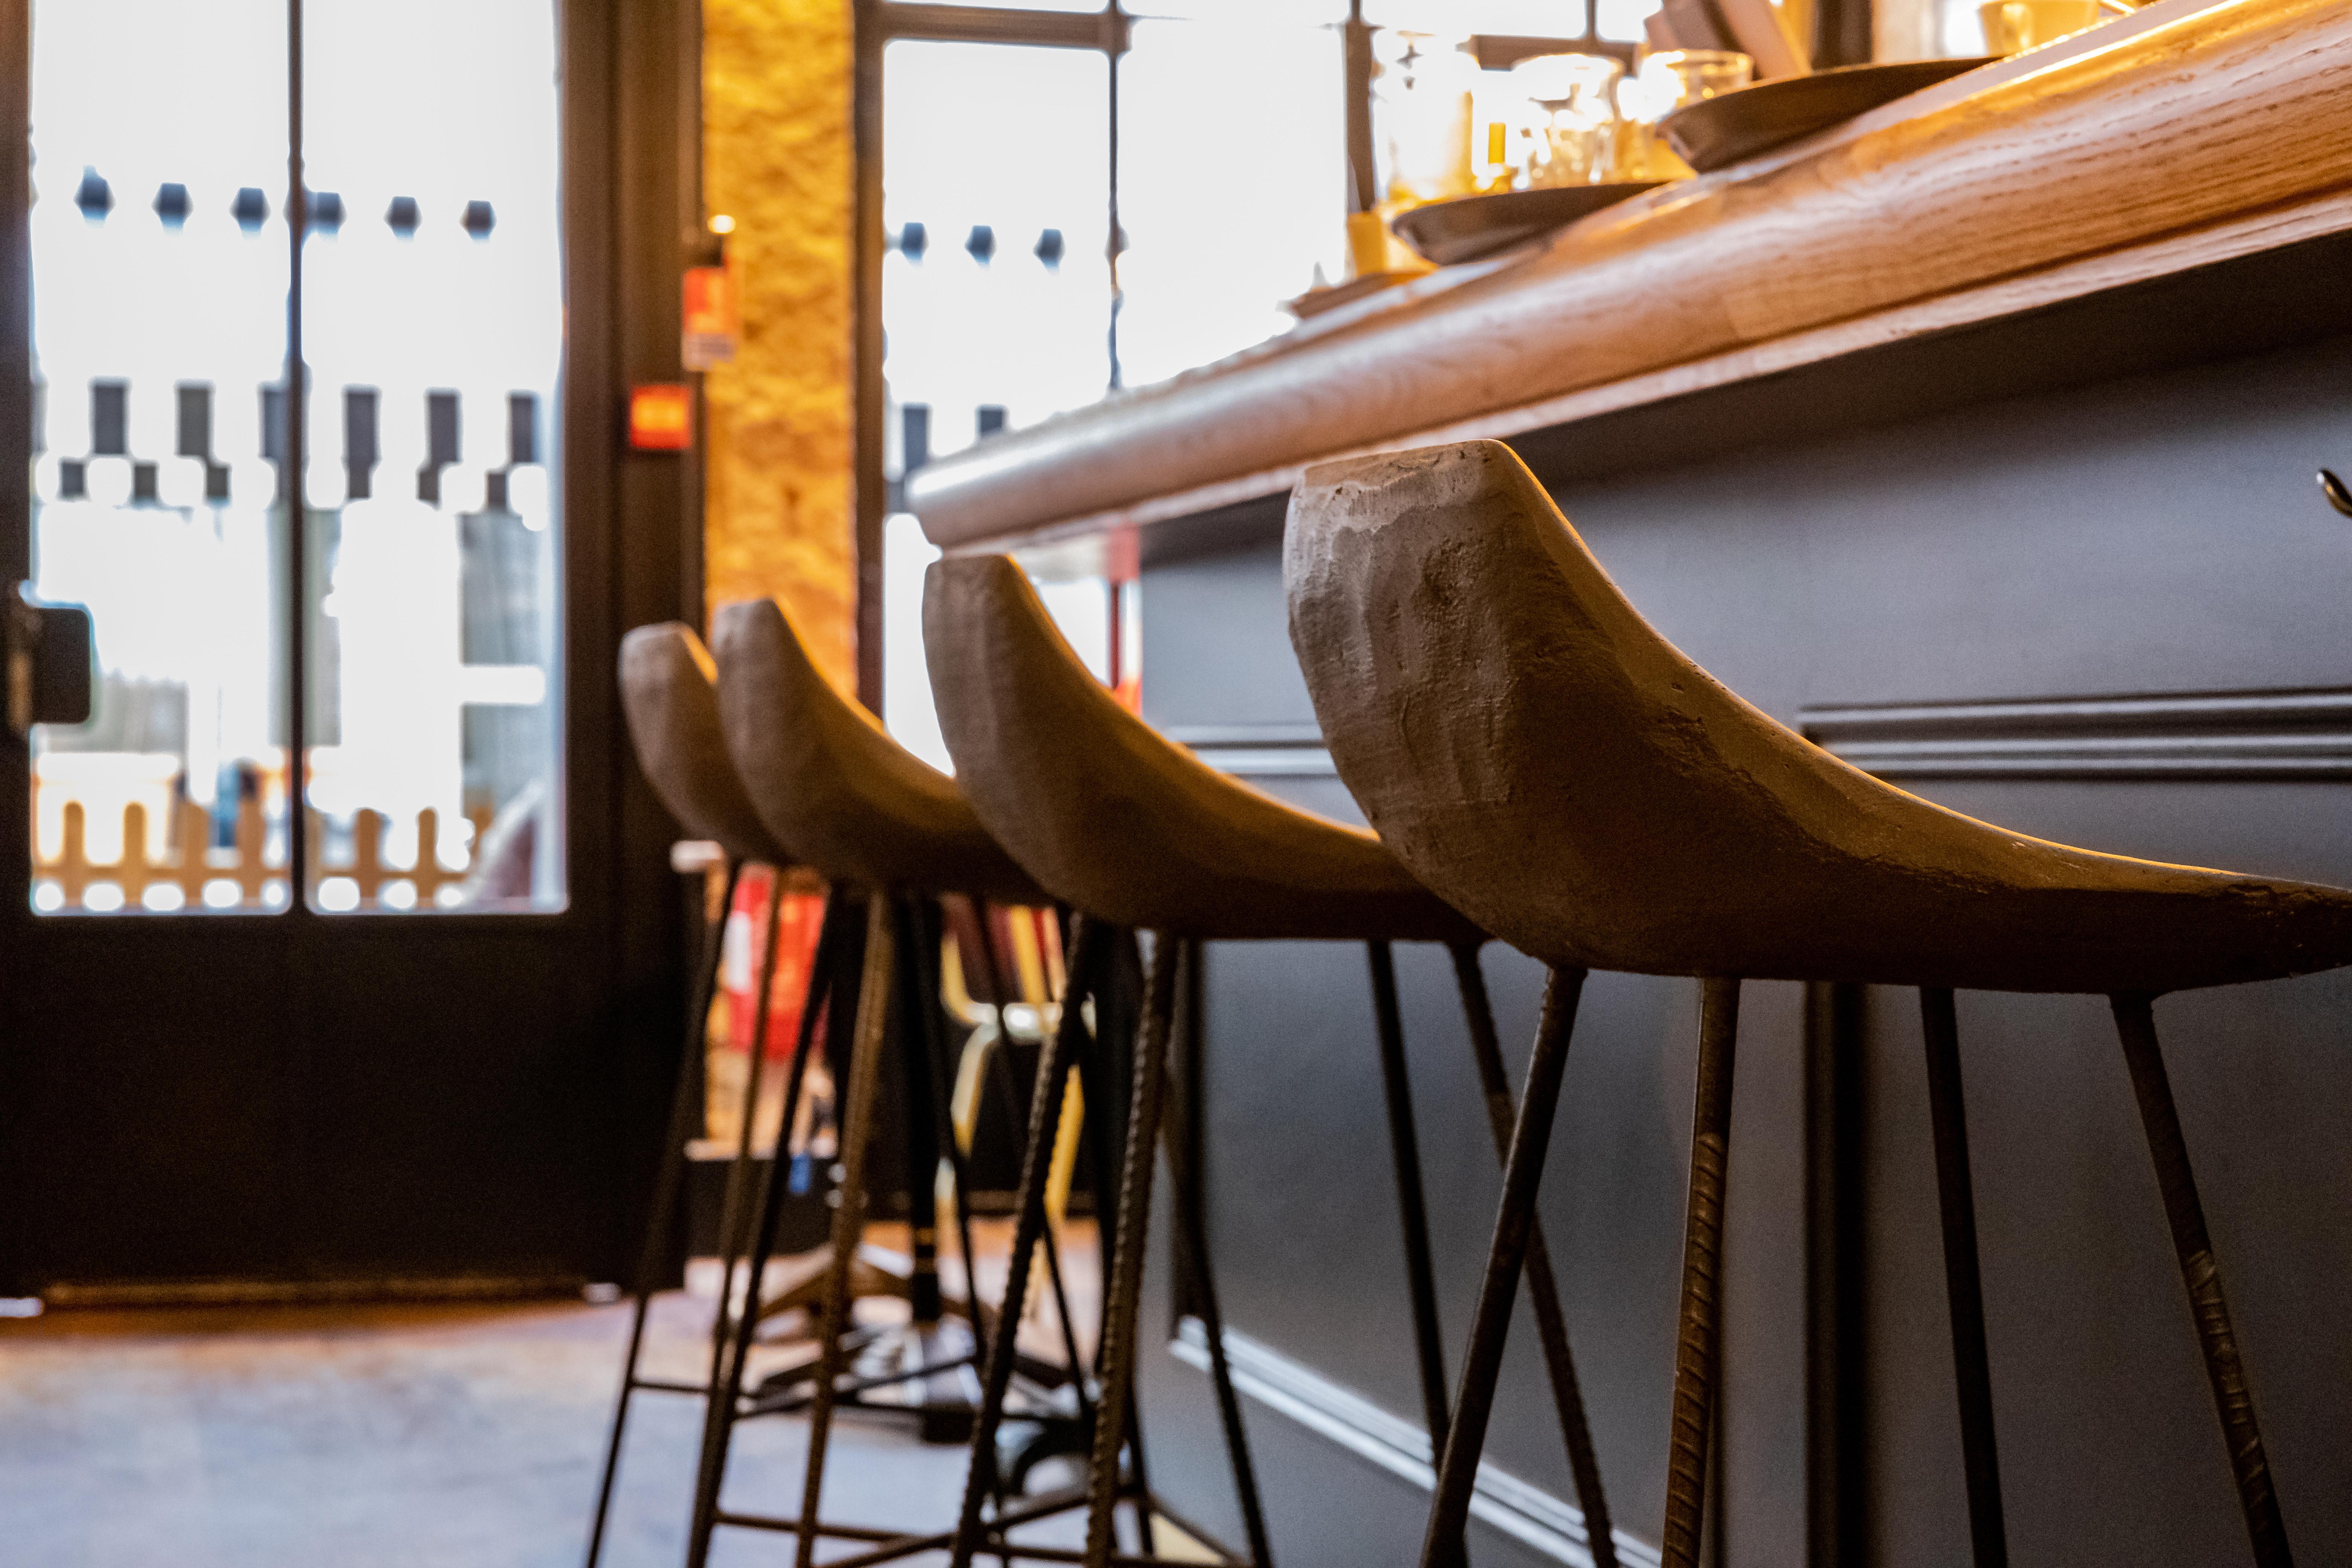 What gives a pub at least 80% of its style? Its bar and bar stools.
Designed by Henri Lavallard­ Boget, the concrete Hauteville bar stool sets a tone, imposes style.
The curvature of the seatback provides full lumbar support, which barflies and